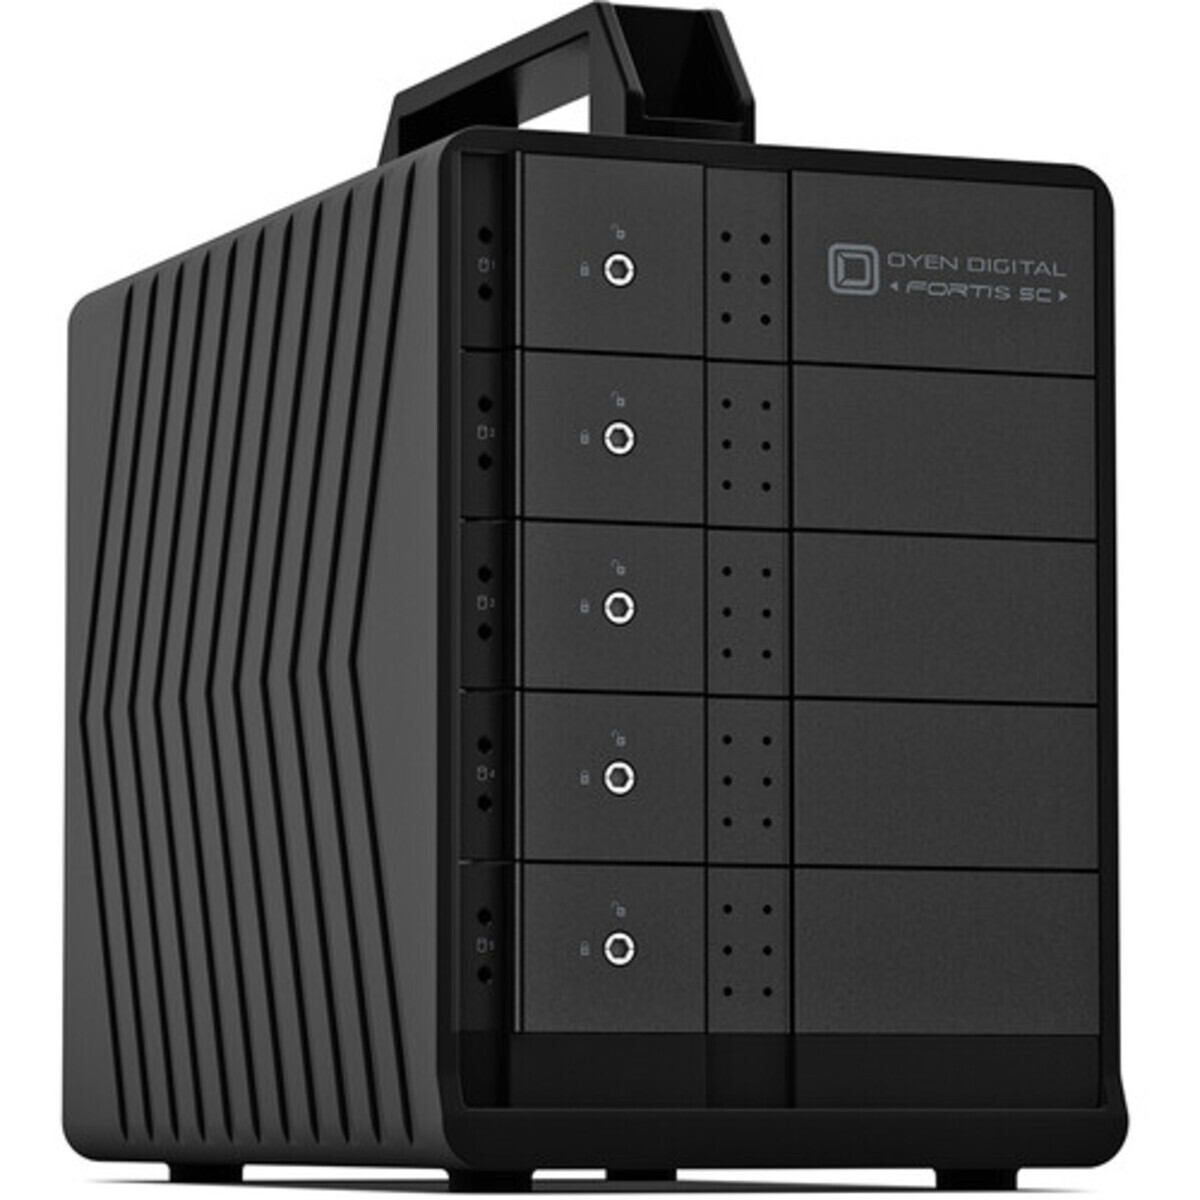 buy OYEN Fortis 5C 20tb Desktop DAS - Direct Attached Storage Device 5x4000gb Seagate BarraCuda ST4000DM004 3.5 7200rpm SATA 6Gb/s HDD CONSUMER Class Drives Installed - Burn-In Tested - nas headquarters buy network attached storage server device das new raid-5 free shipping usa spring sale Fortis 5C